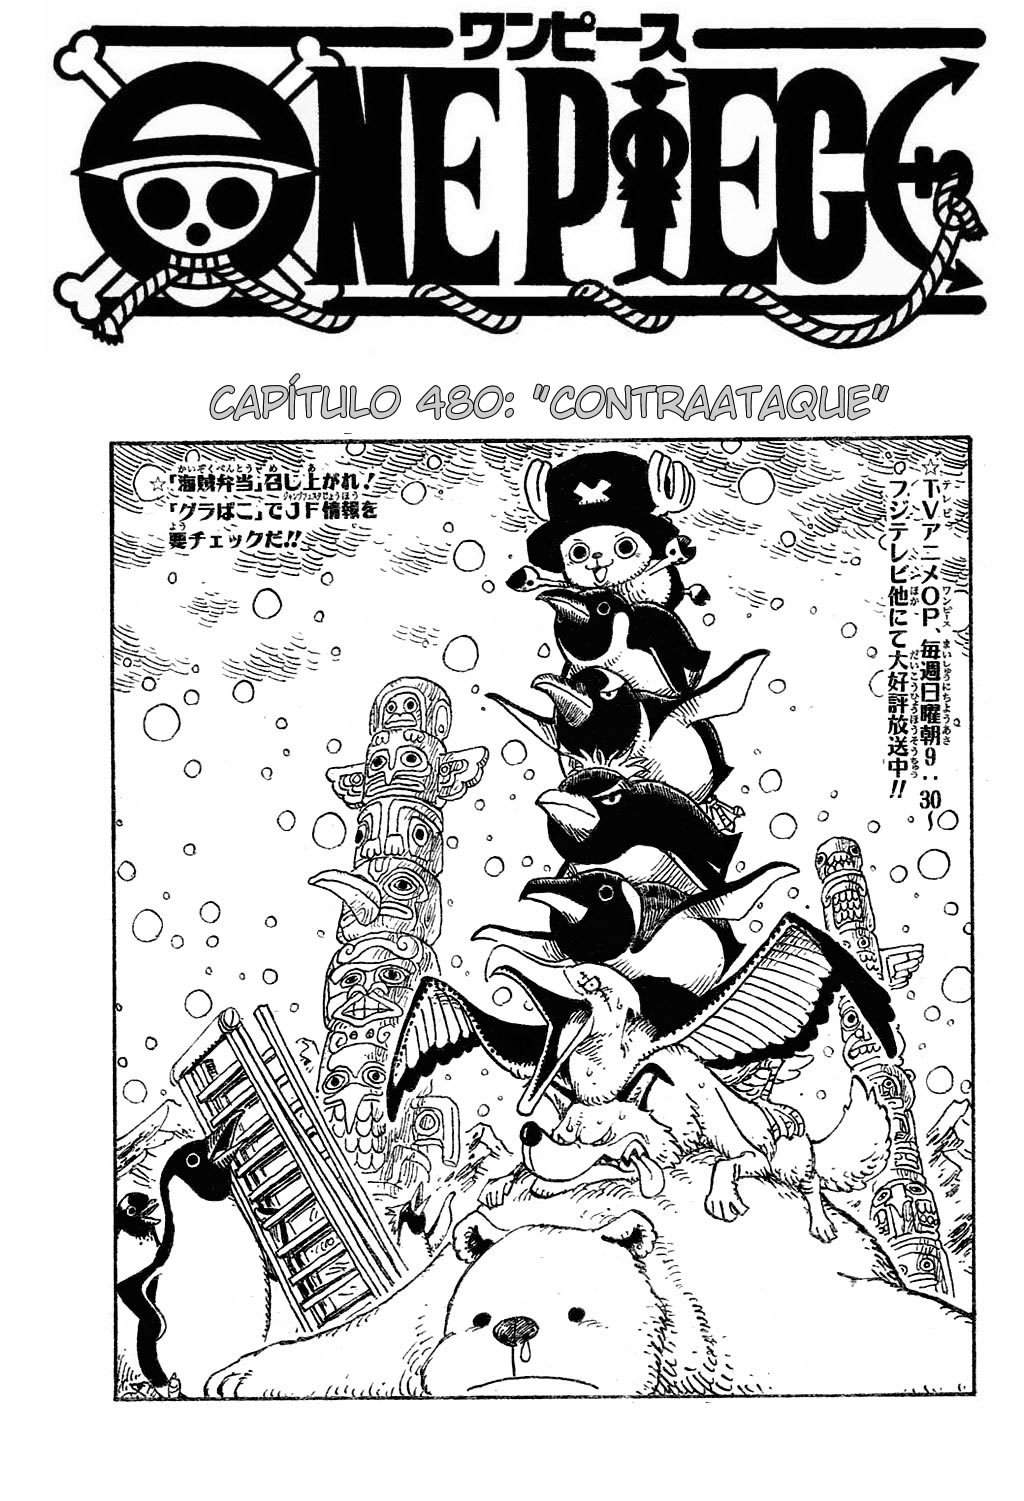 Capitulo 480 Wiki One Piece Amino